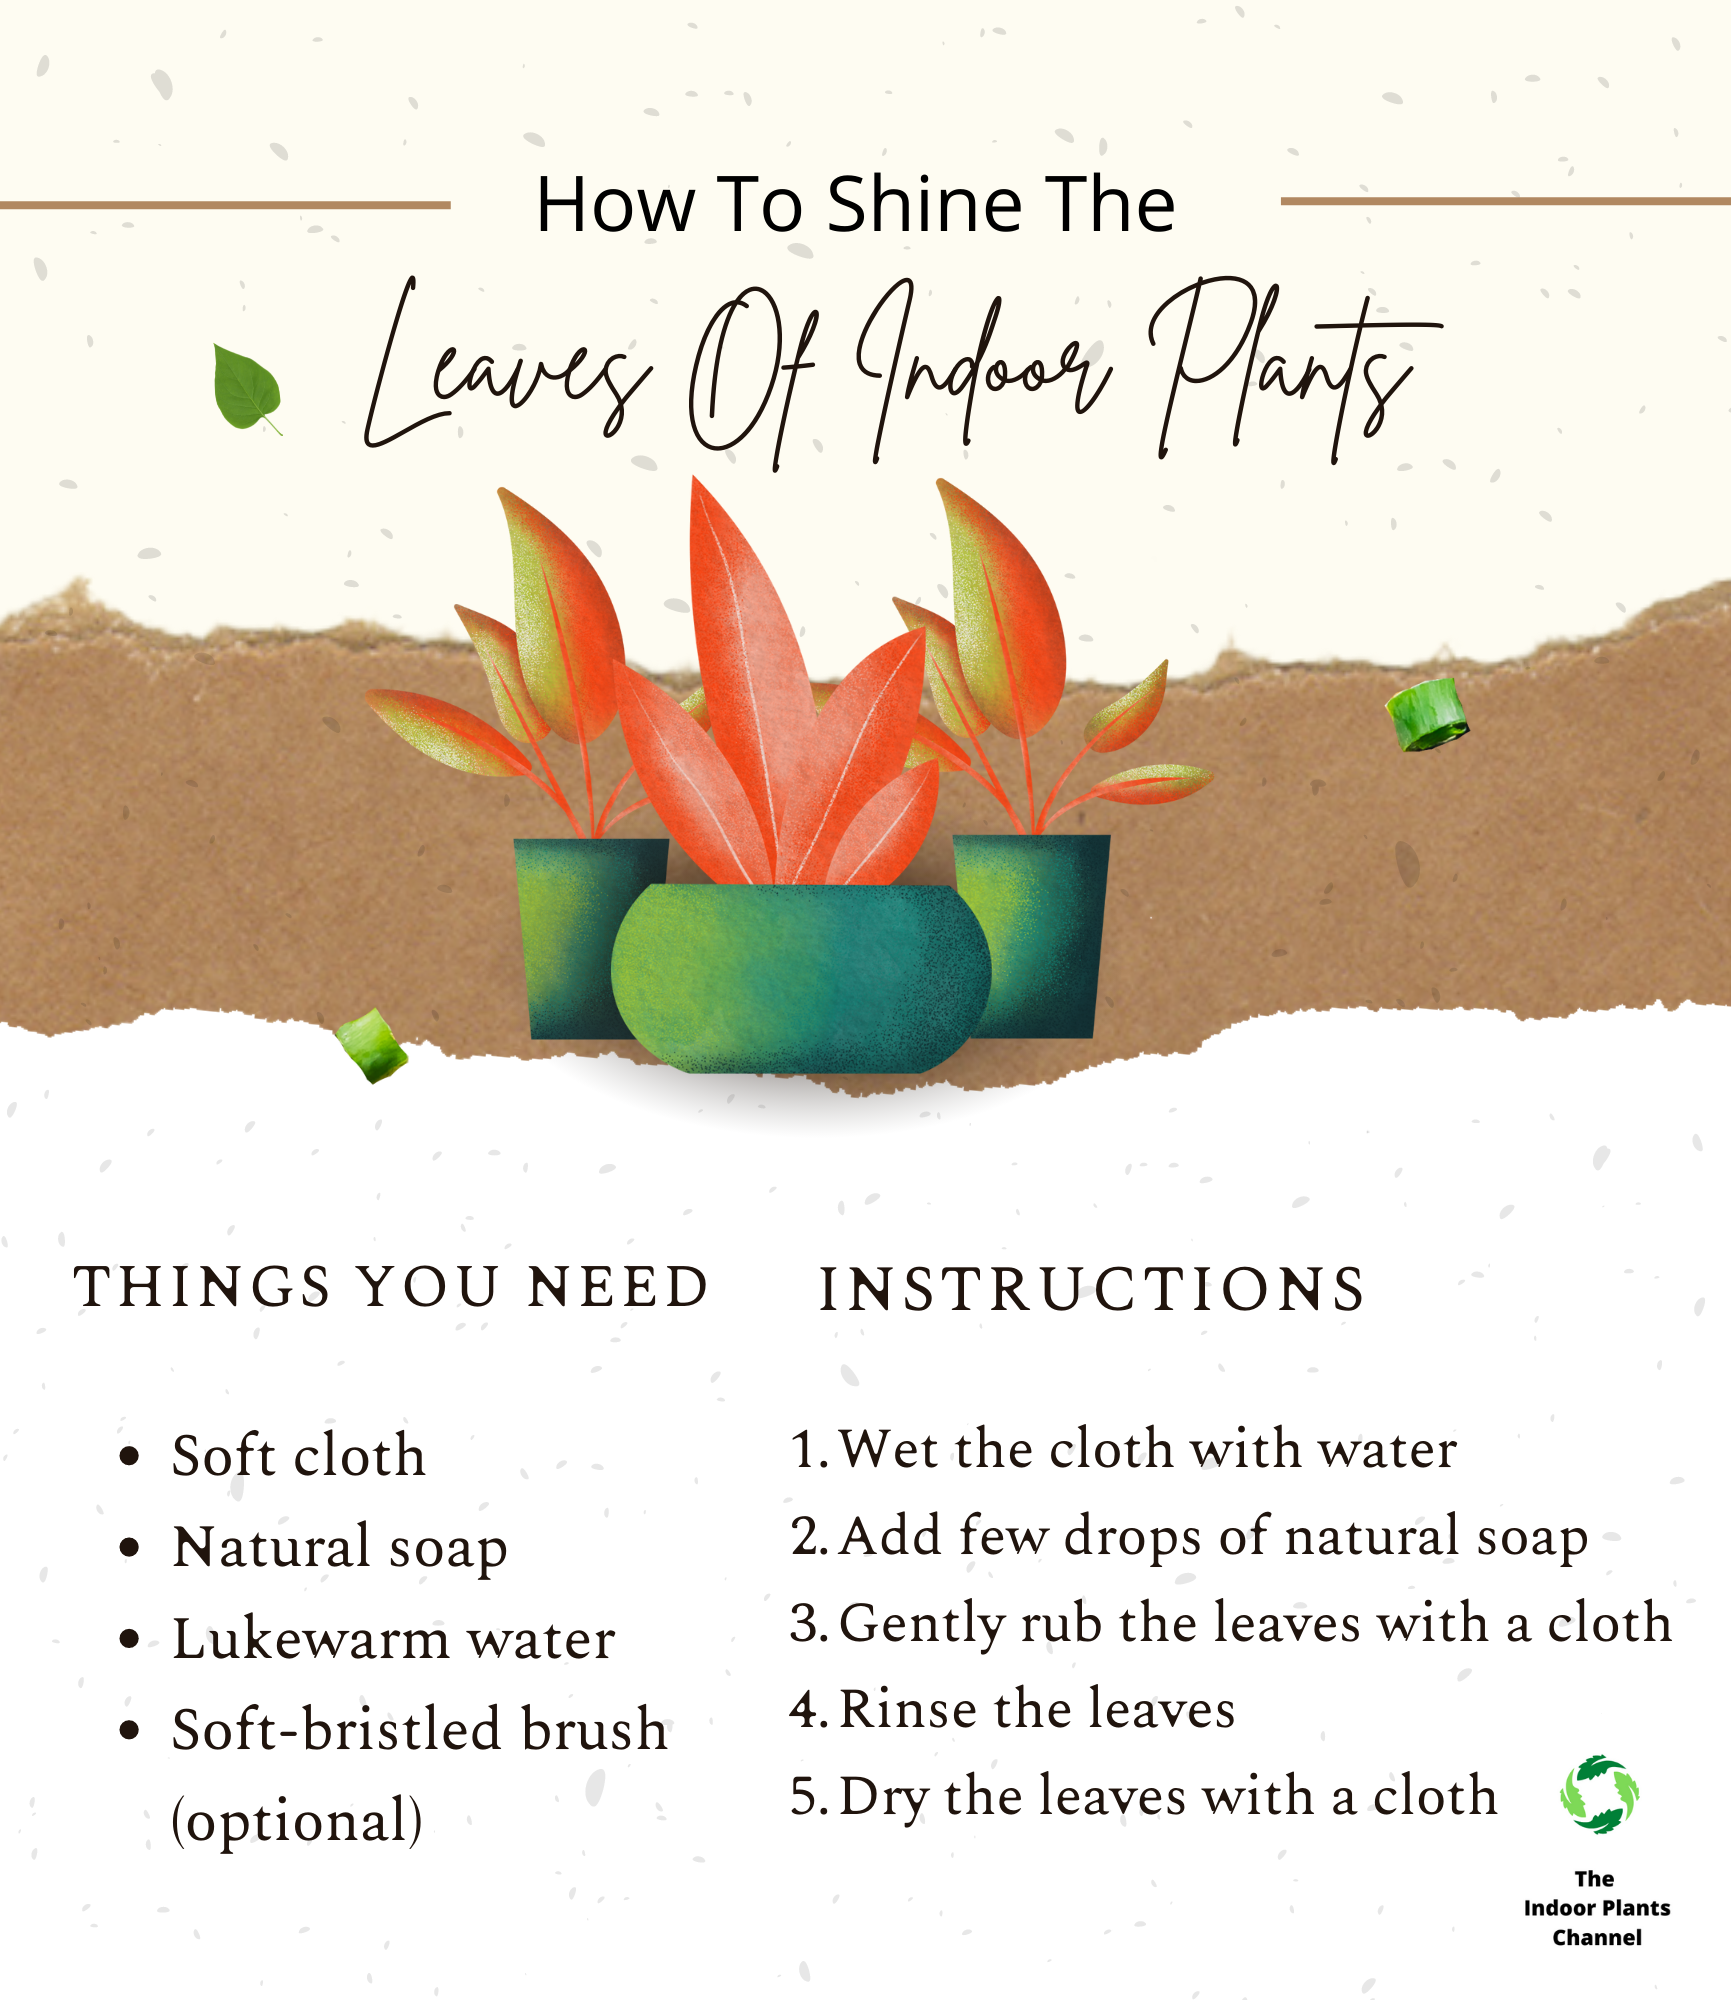 How to Shine Indoor Plant Leaves